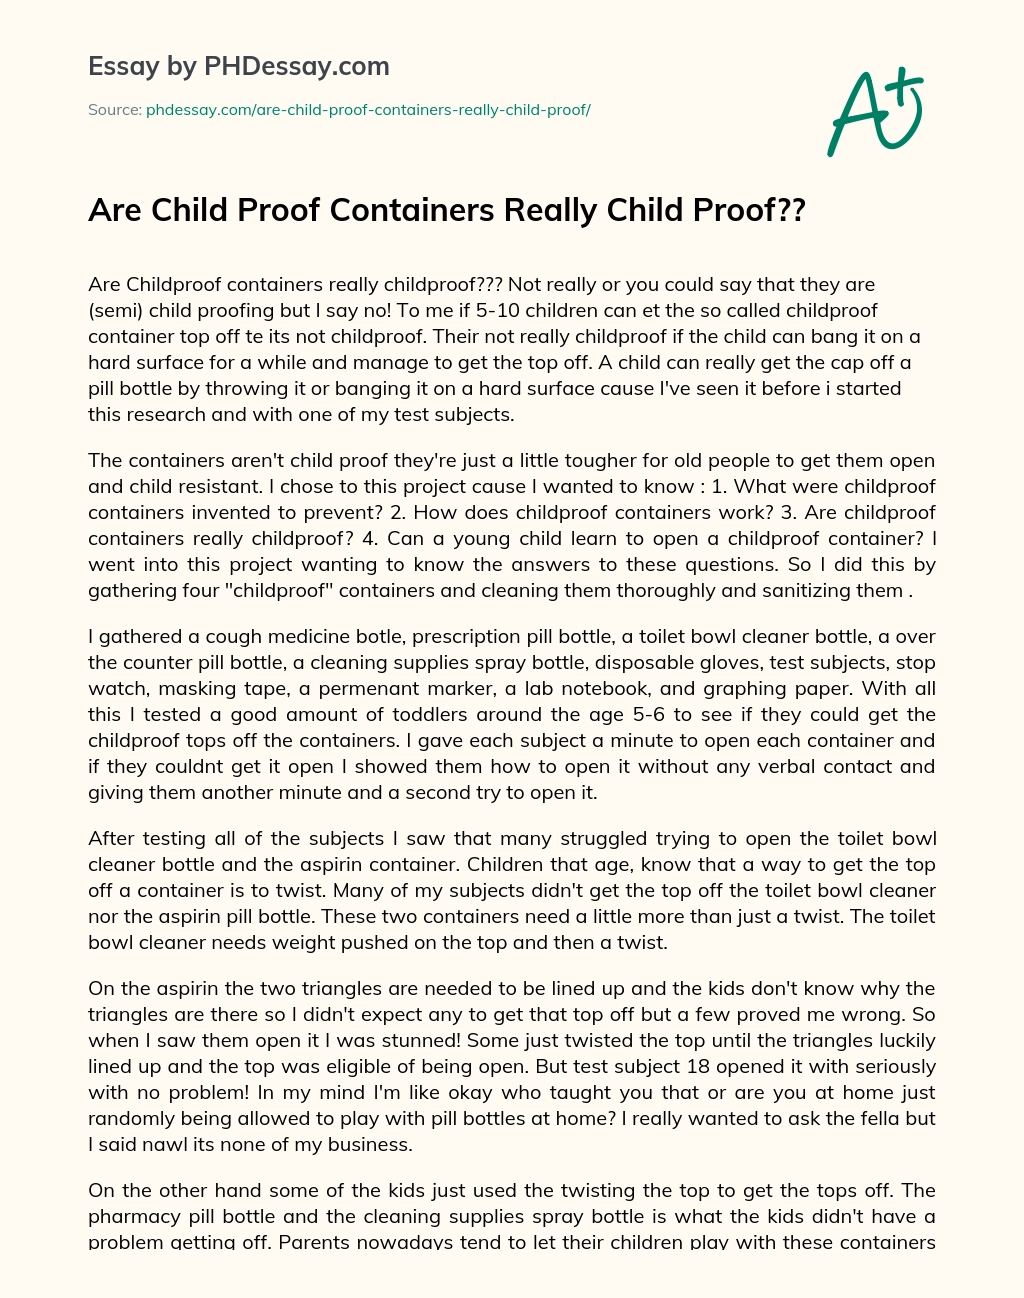 Are Child Proof Containers Really Child Proof?? essay